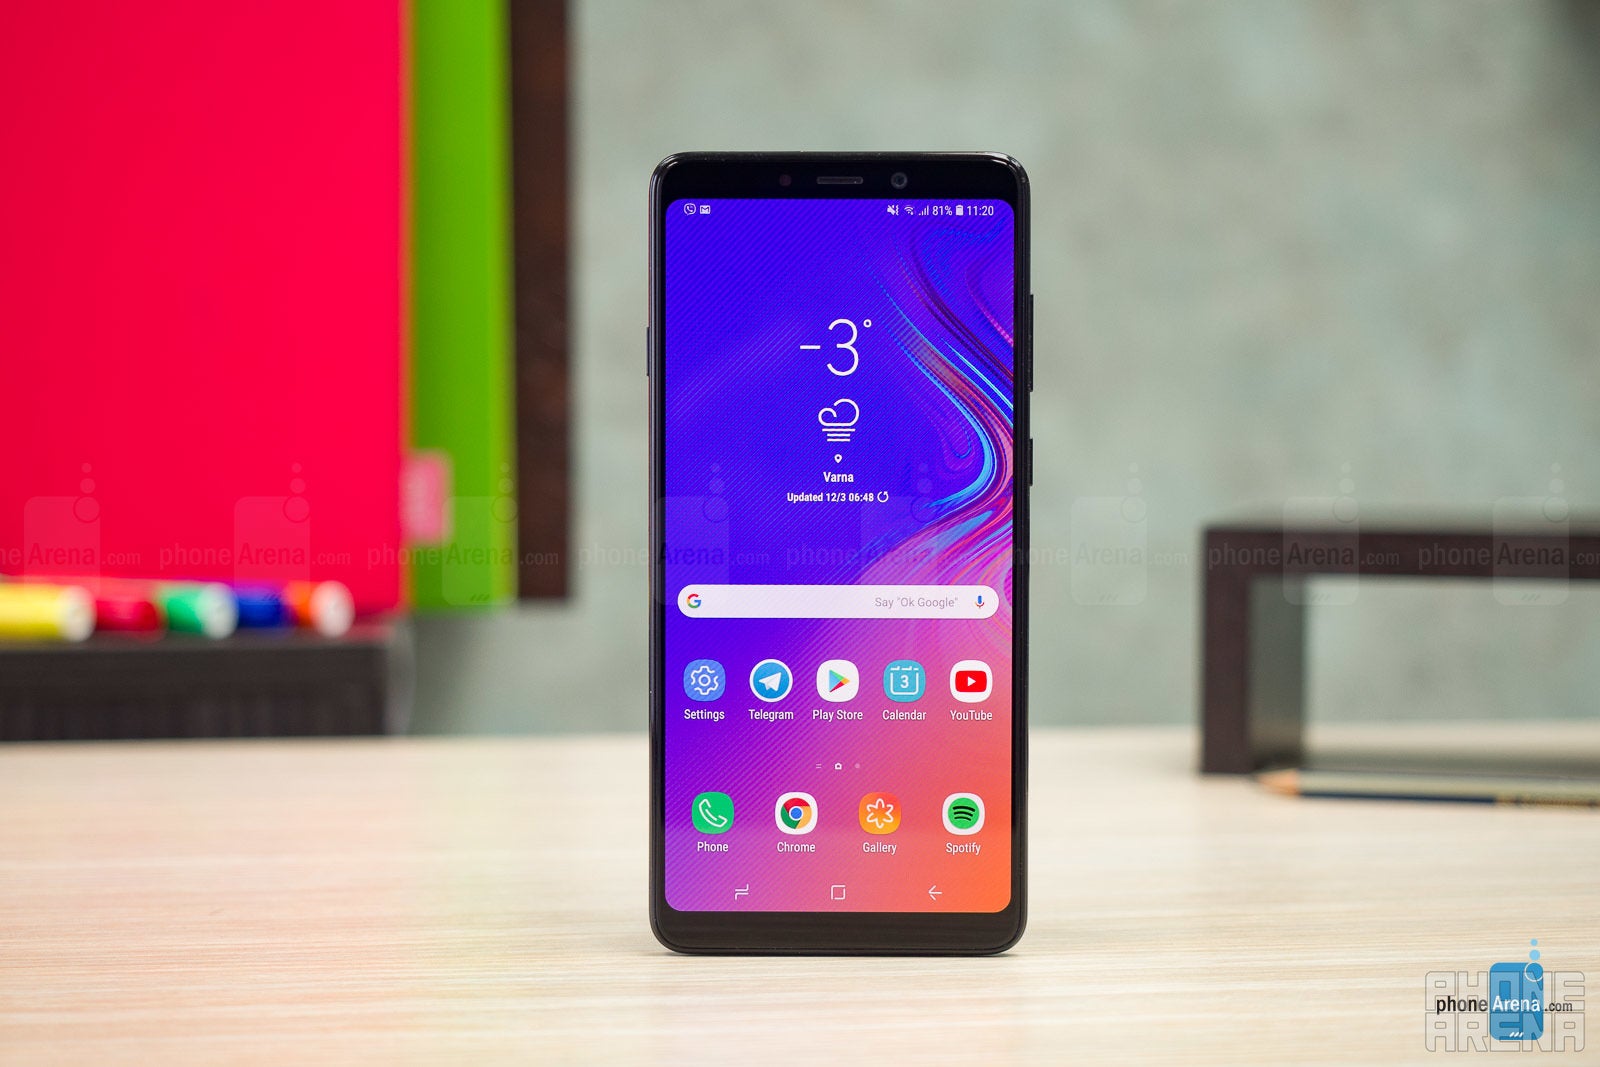 Samsung Galaxy A9 (2018) Review